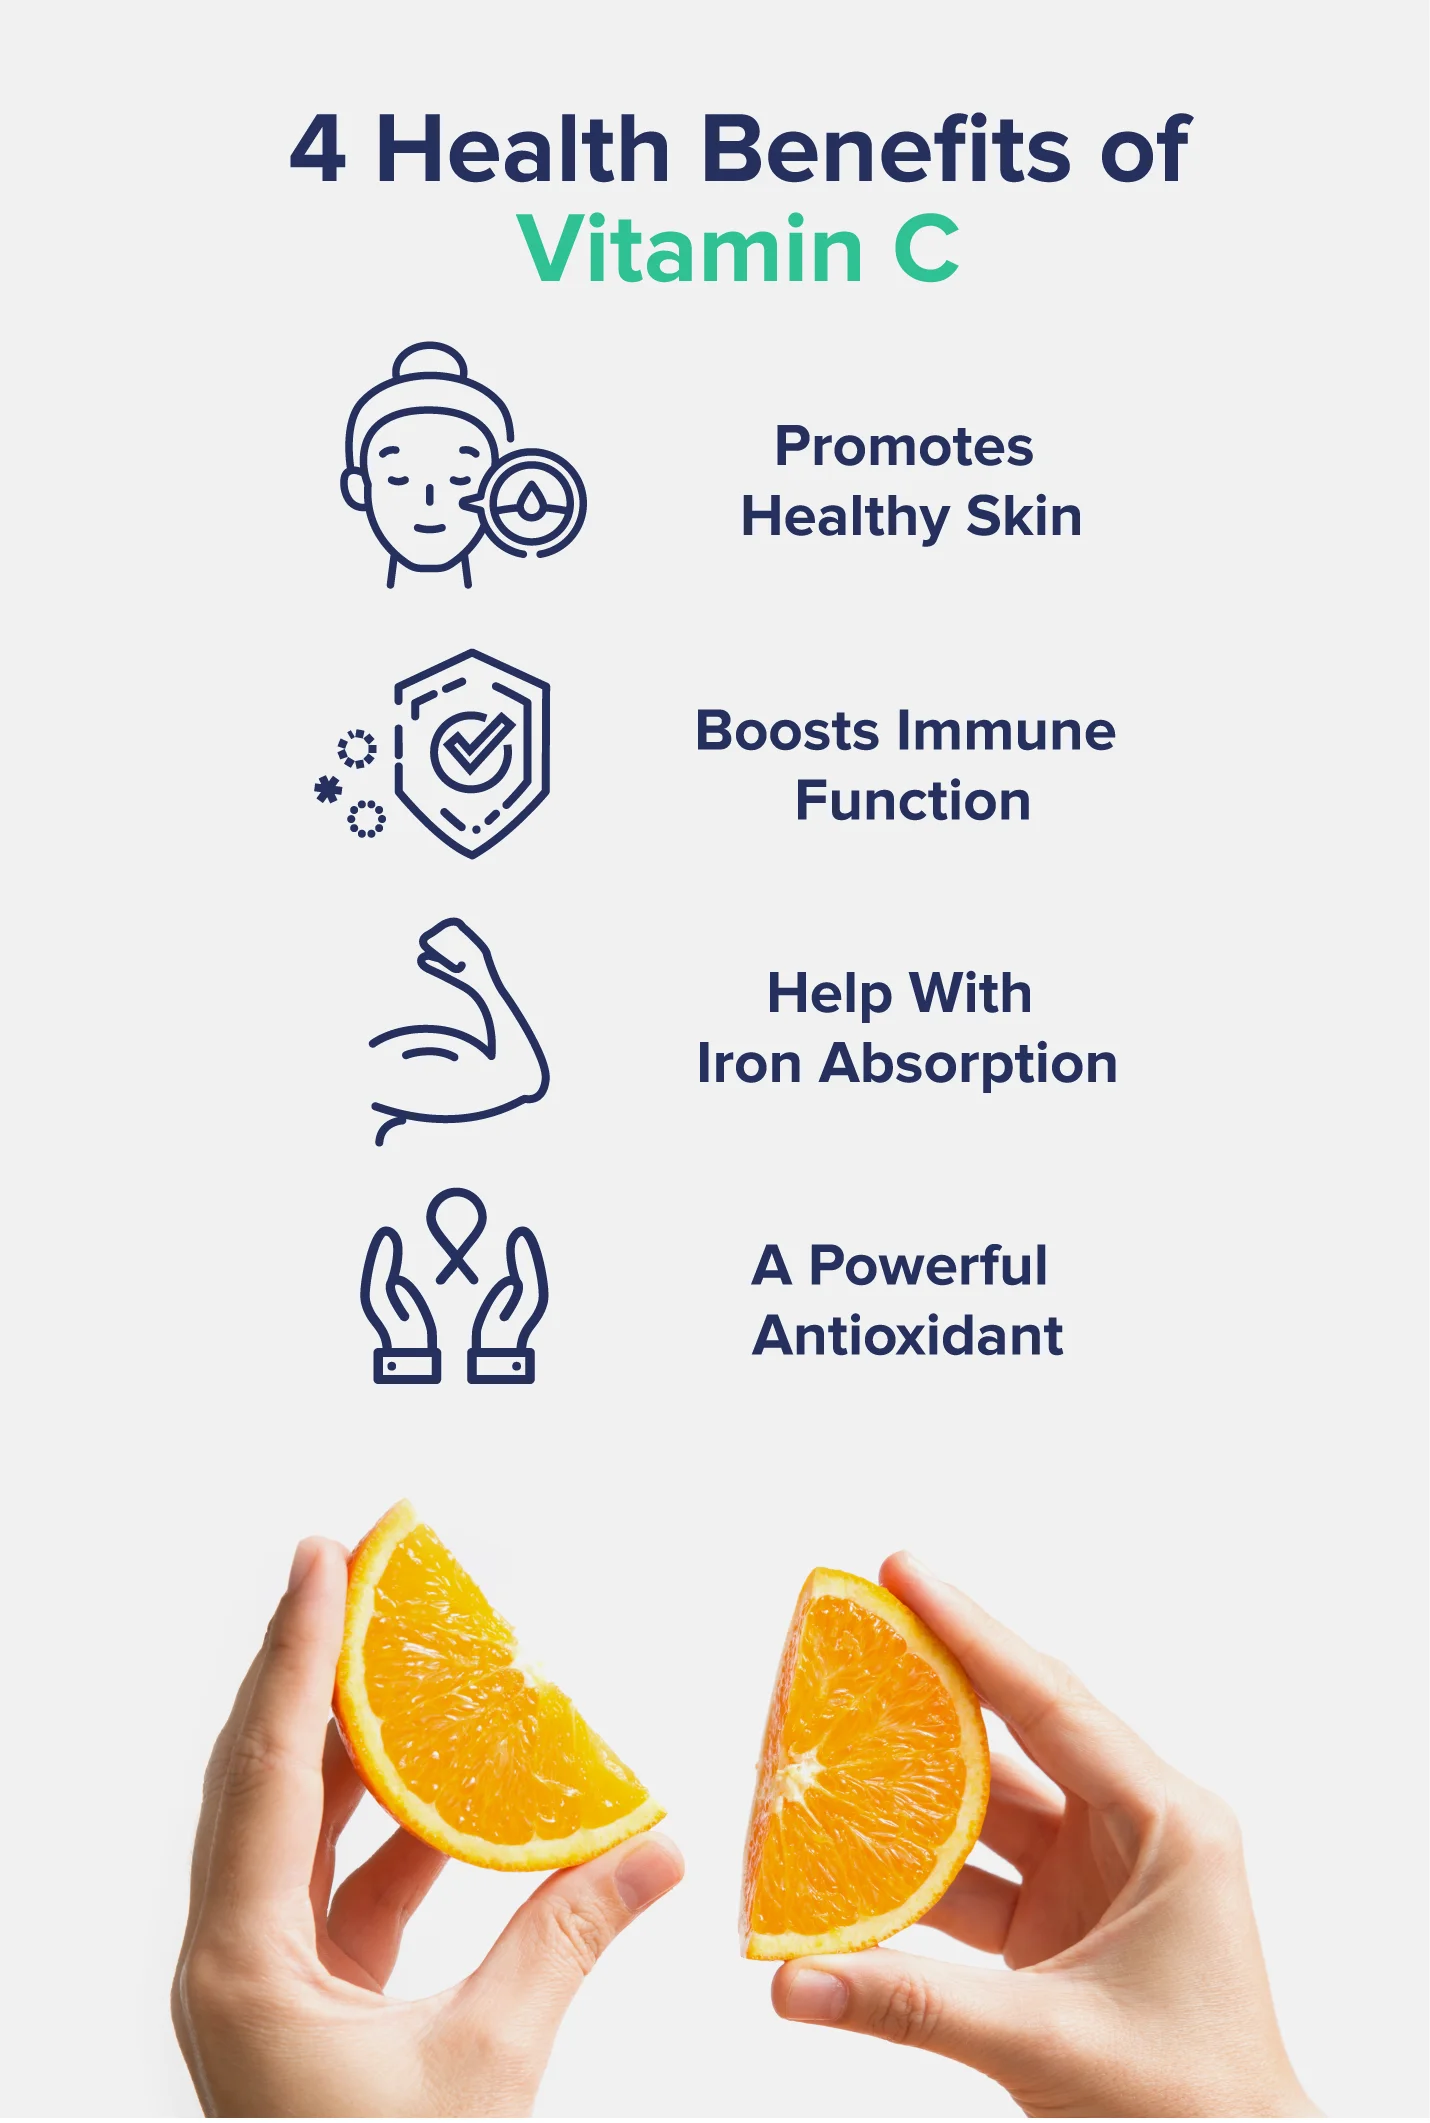 A graphic entitled "4 Health Benefits of Vitamin C," listing benefits like "boost immune function" and "helps with iron absorption" with accompanying images.